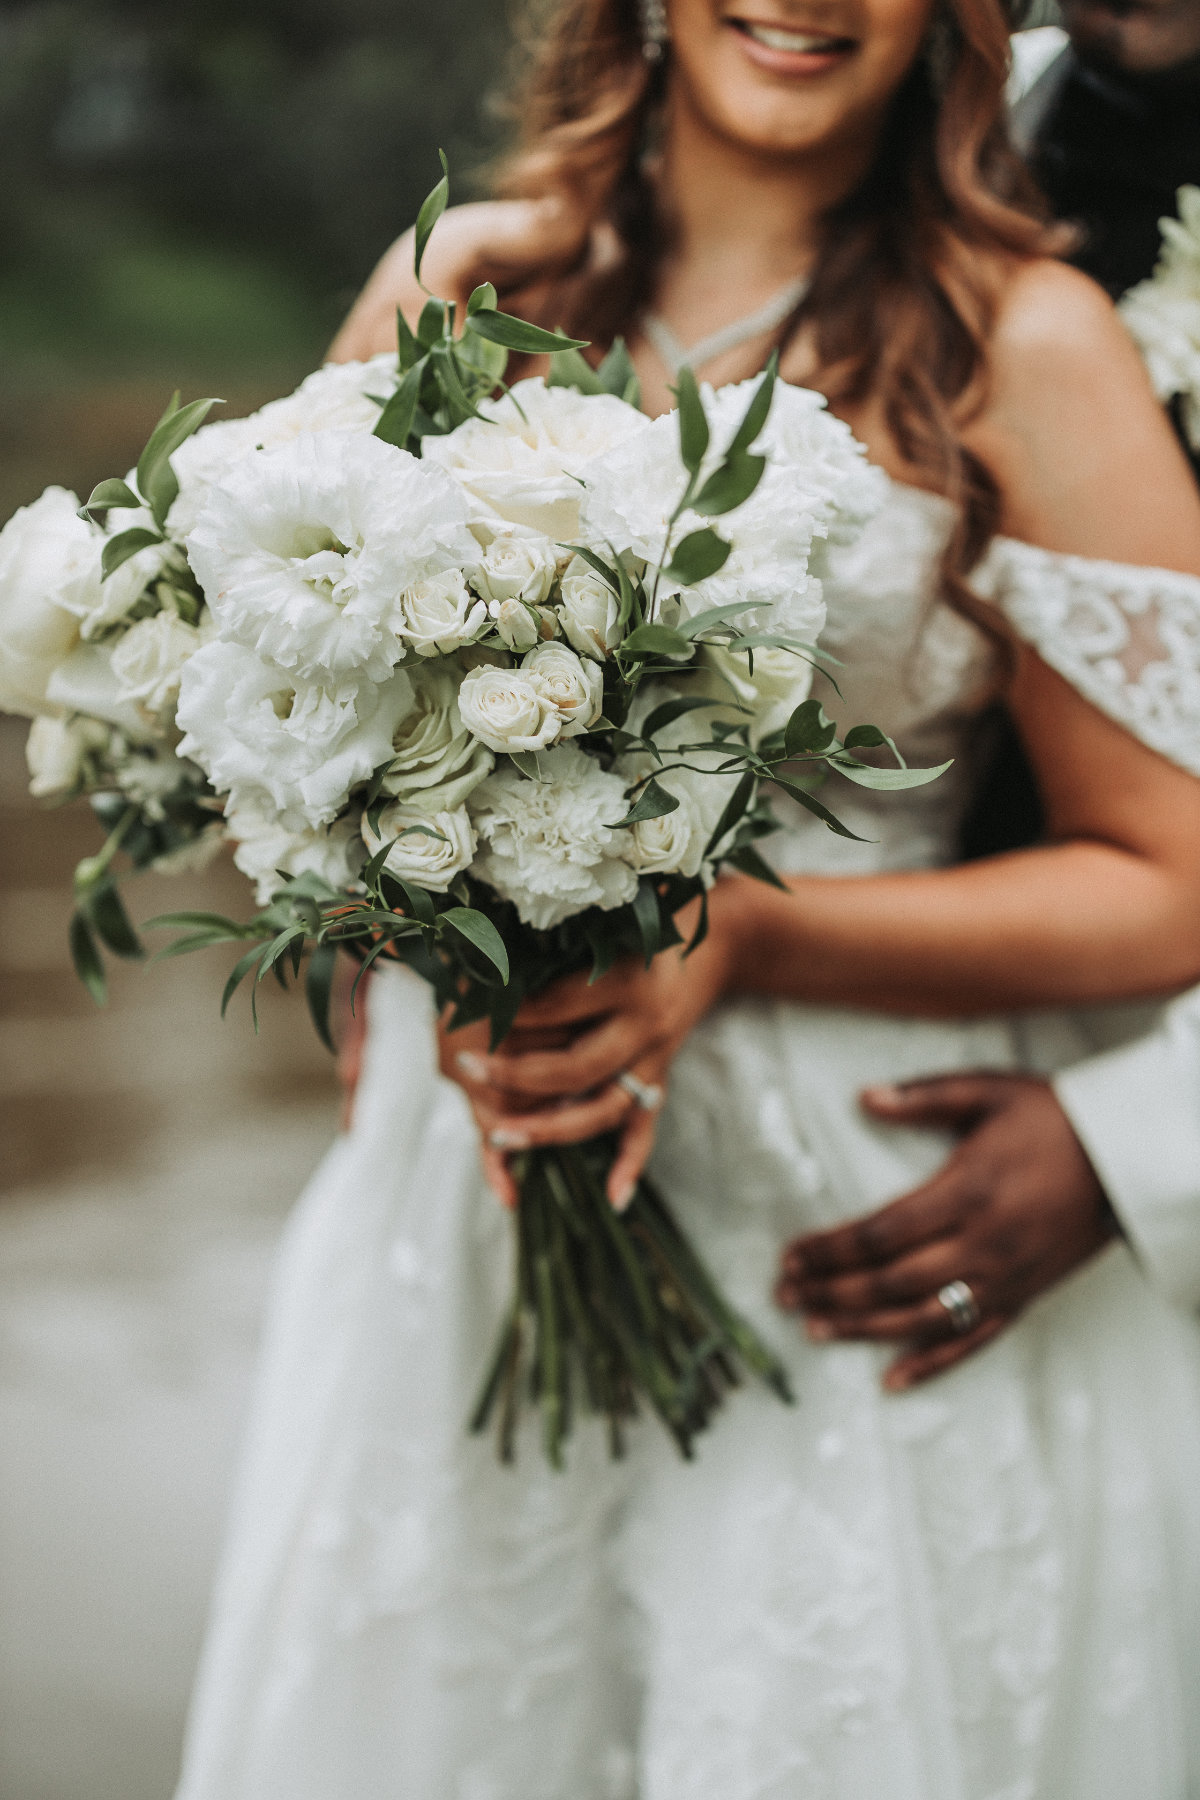 Cindy and Abdi's beautiful Leonda by the Yarra wedding photographed by Fame Park Studios